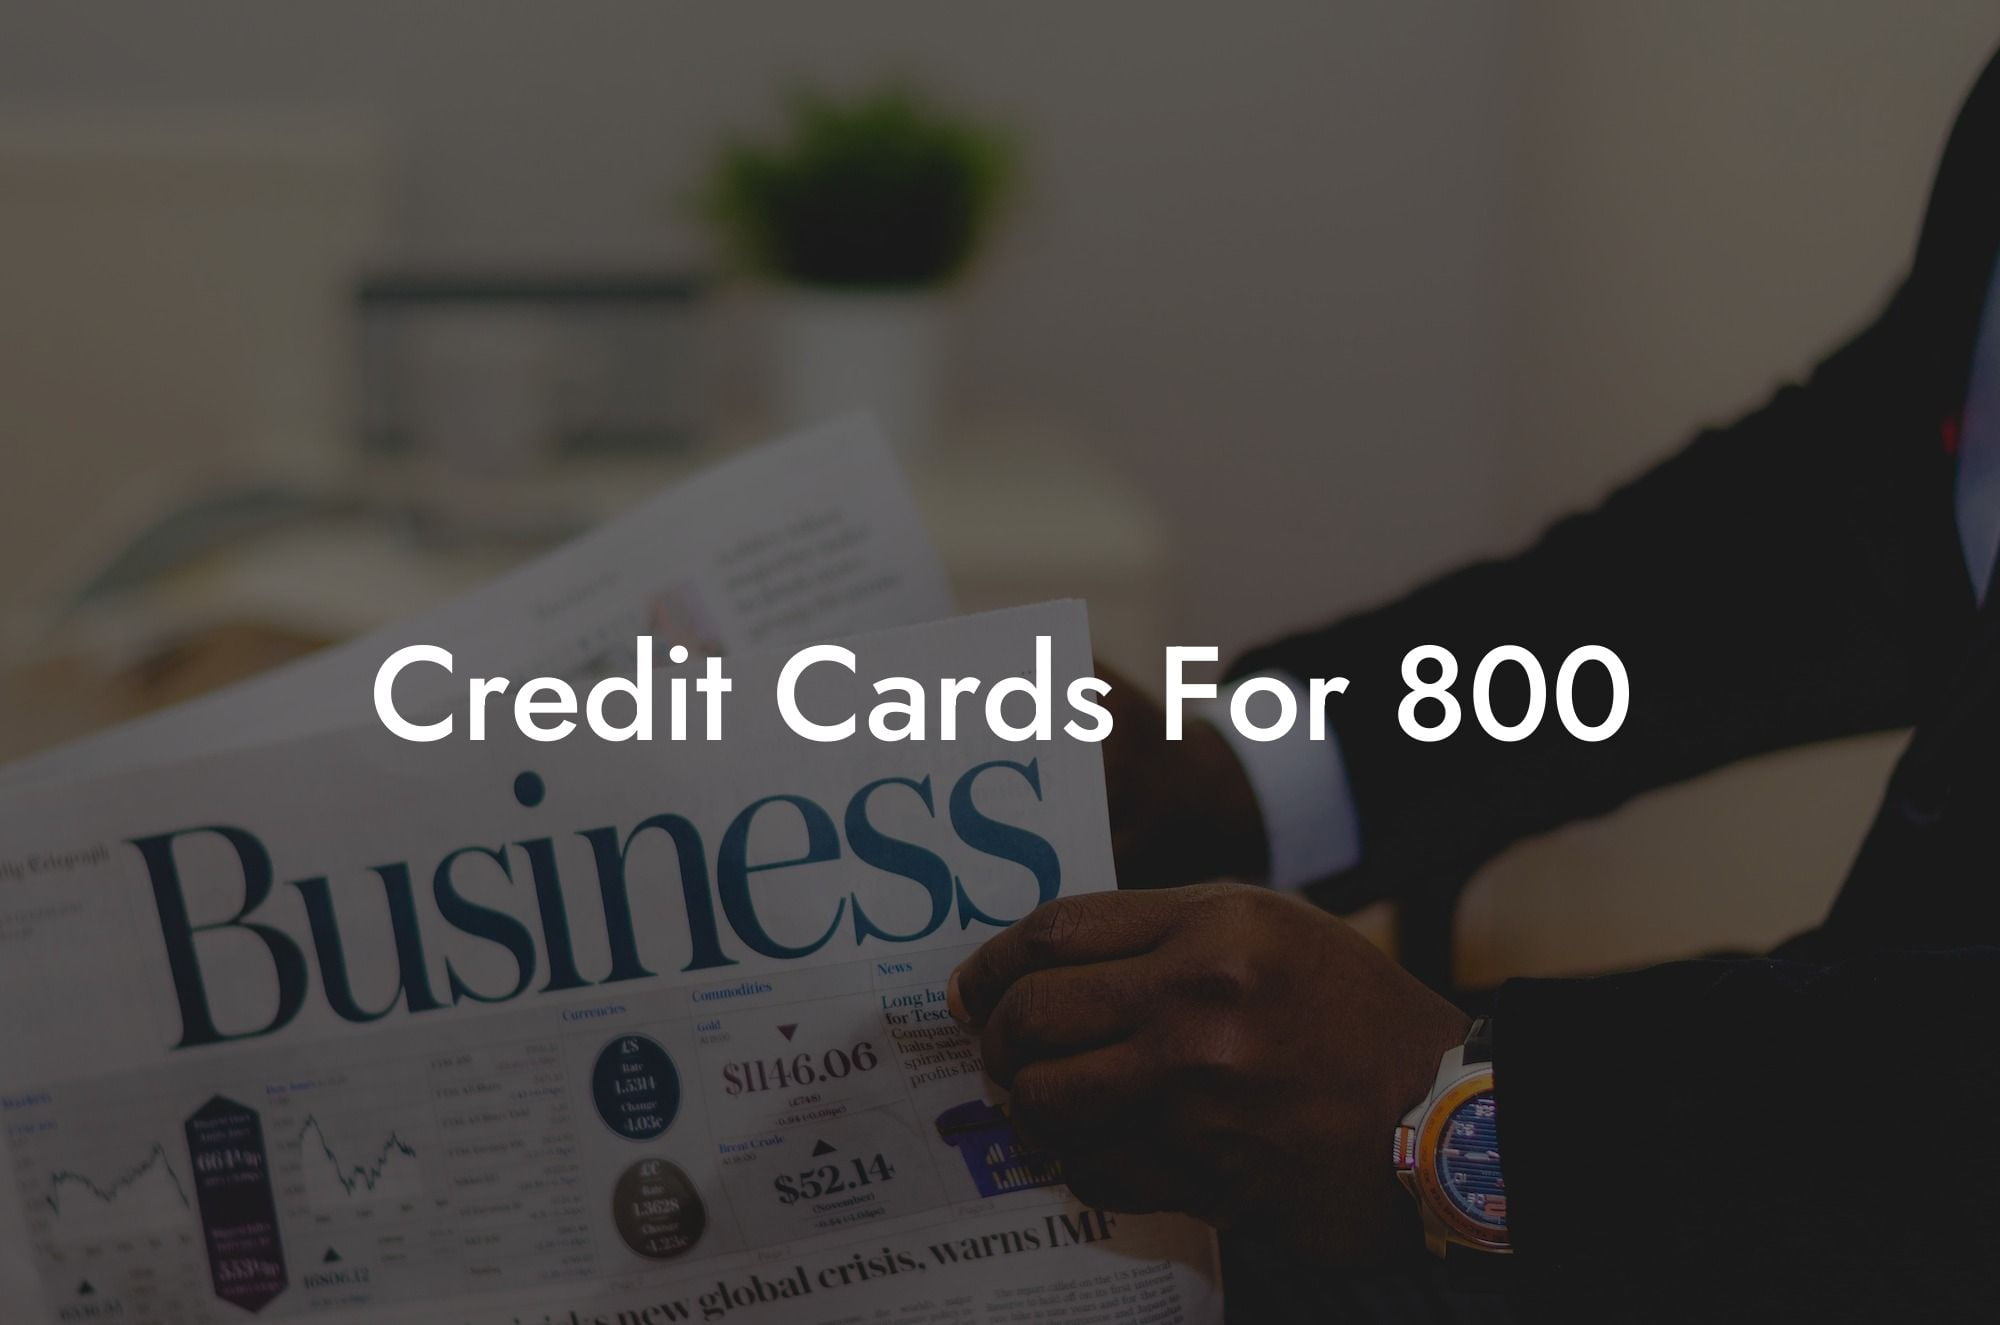 Credit Cards For 800